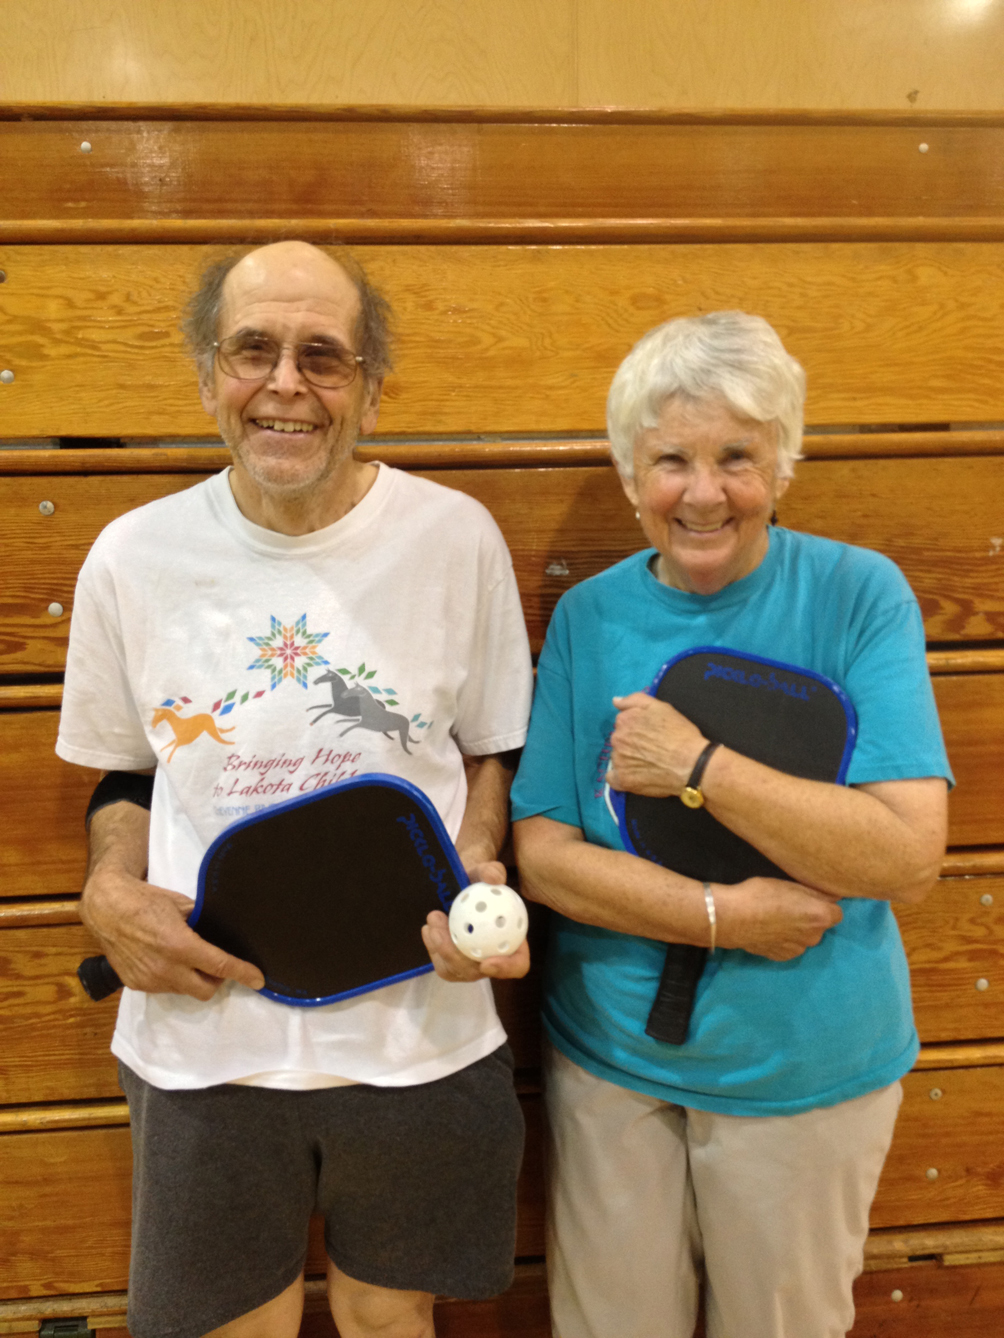 Doug Dodd and Kathy Hill scored a gold medal in the mixed double Pickleball competition during the 11th annual Alaska International Senior Games.-Photo by Shannon Reid